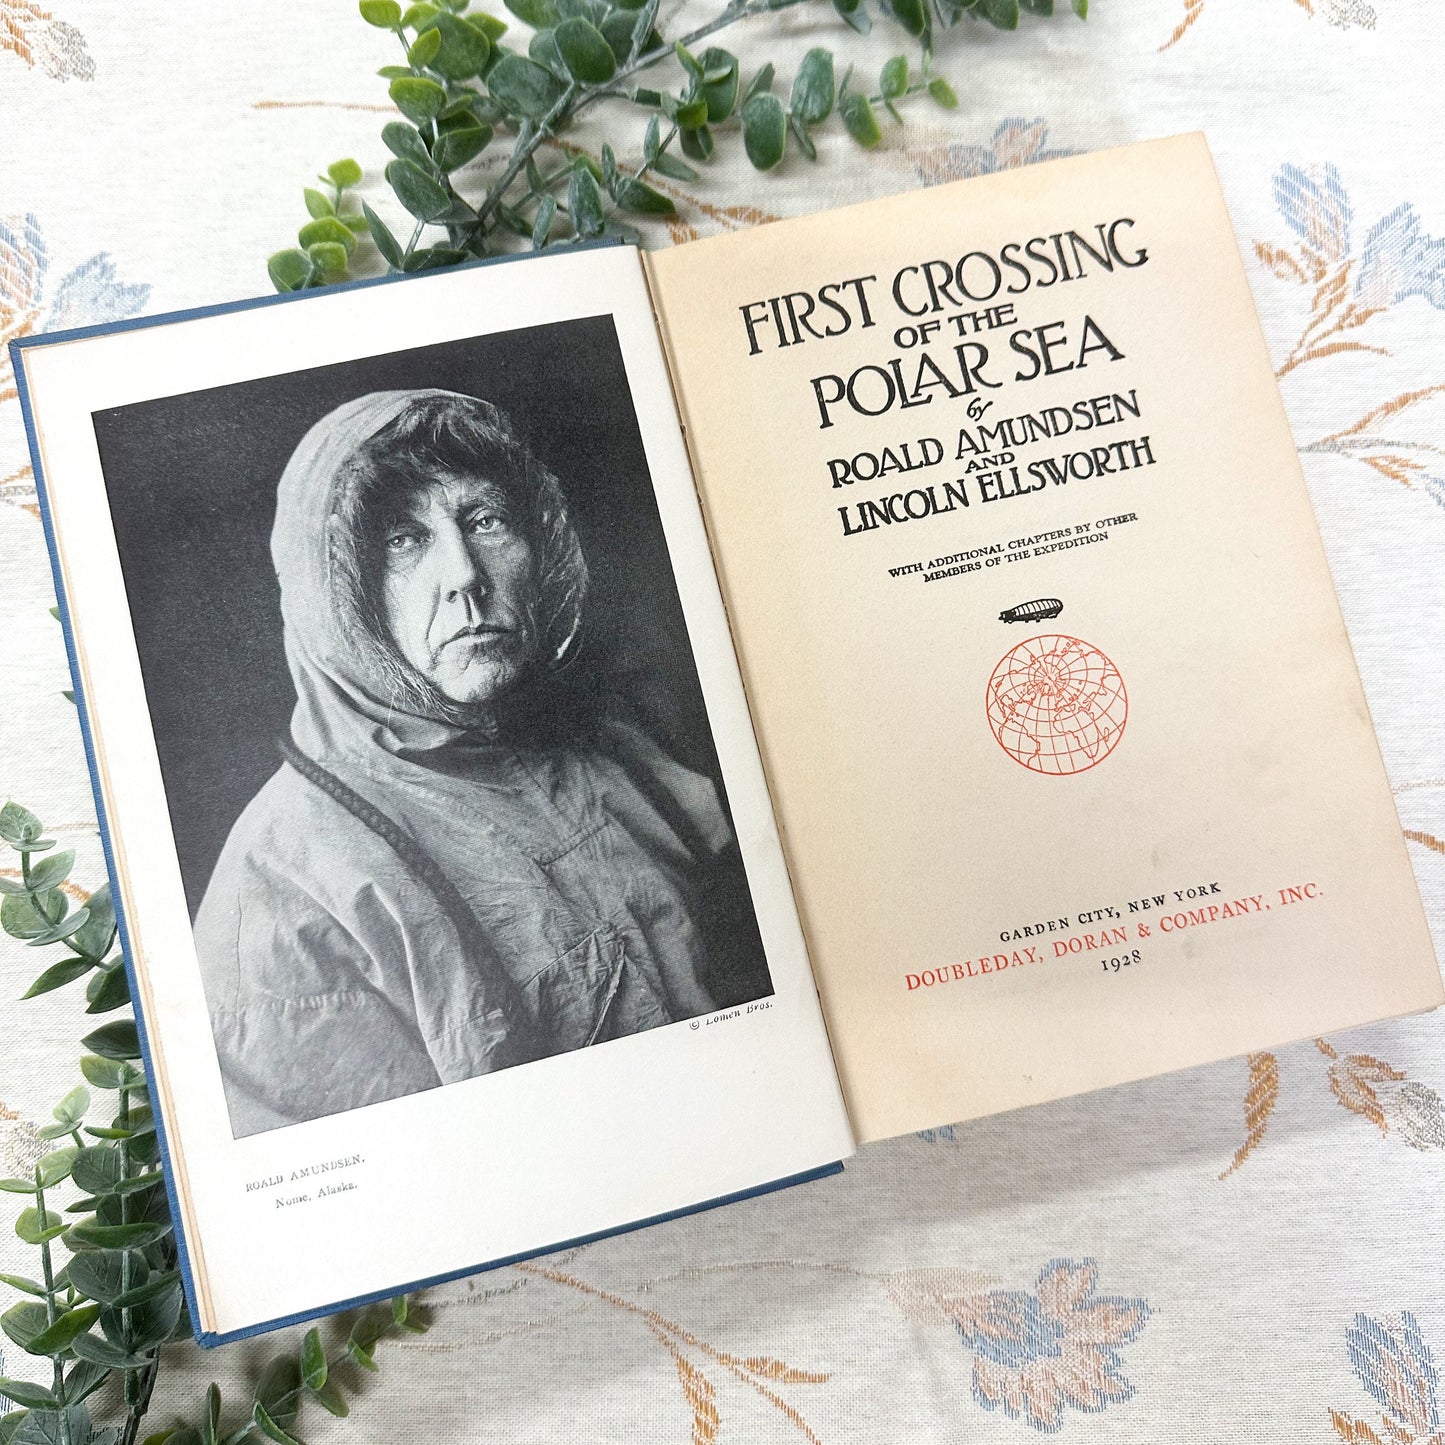 First Crossing of the Polar Sea by Roald Amundsen and Lincoln Ellsworth